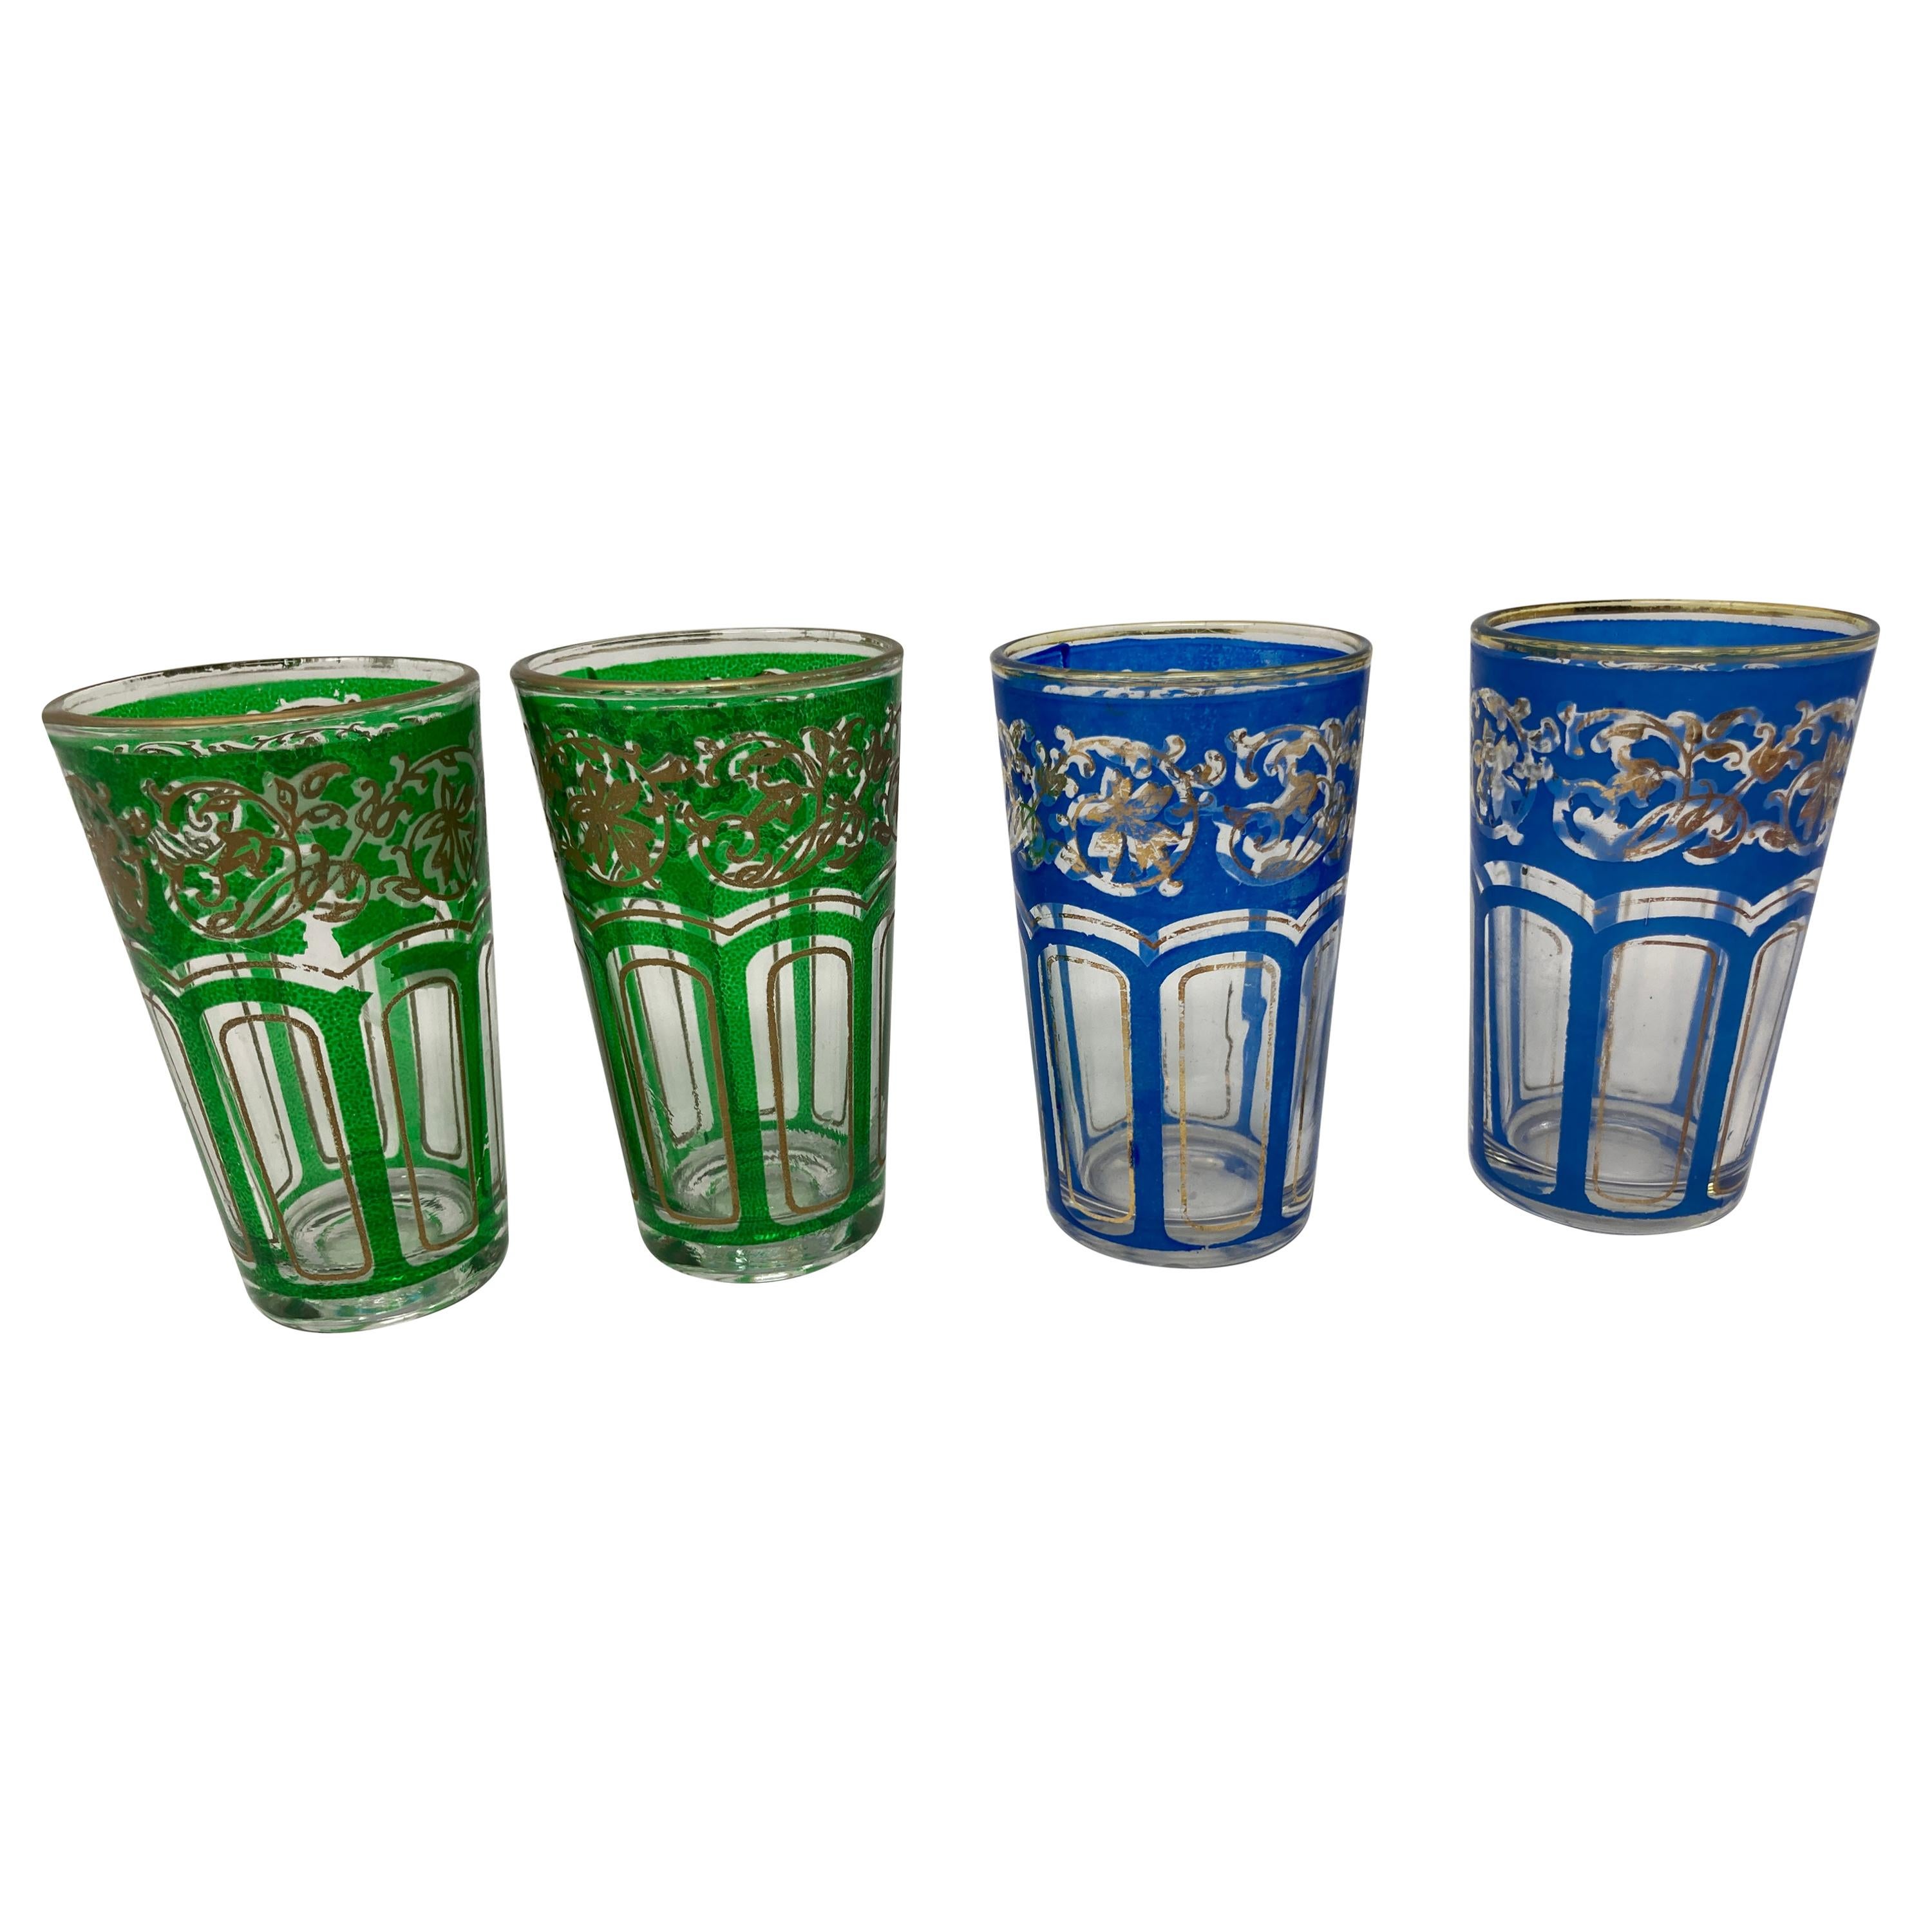 Set of Four Vintage Colored Glasses with Gold Raised Moorish Design